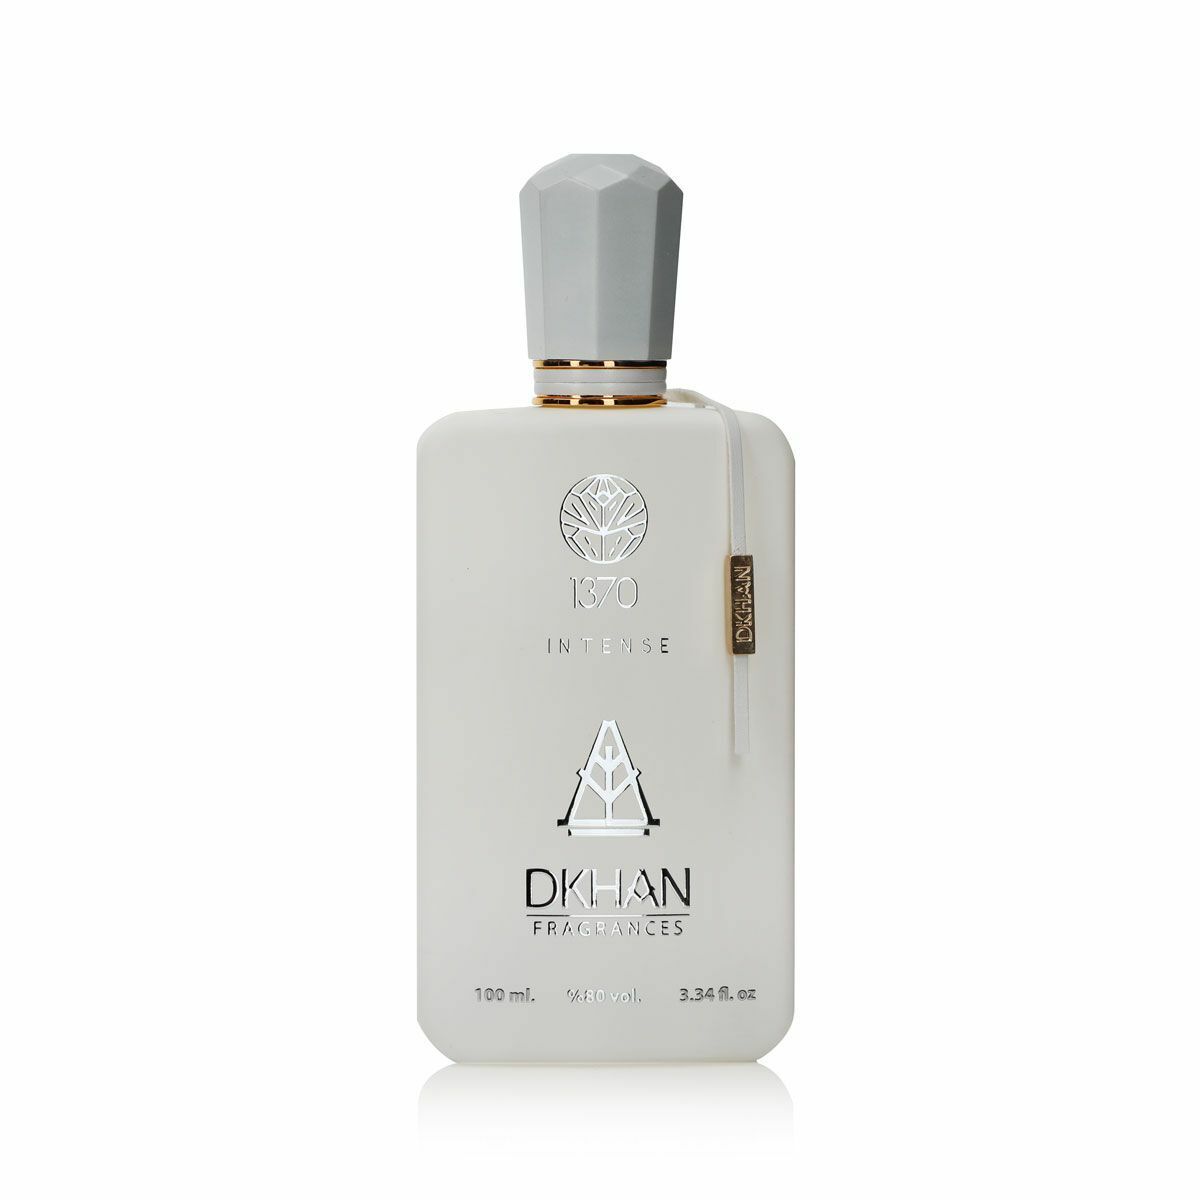 The image displays an elegant, matte-finished, frosted glass perfume bottle with a silver cap. On the front, the bottle is embossed with the number "1370" above the word "INTENSE", and below that is the emblem of "DKHAN FRAGRANCES". A leaf-like logo is printed above the number "1370". On the side of the bottle is a slender vertical label with additional branding details.